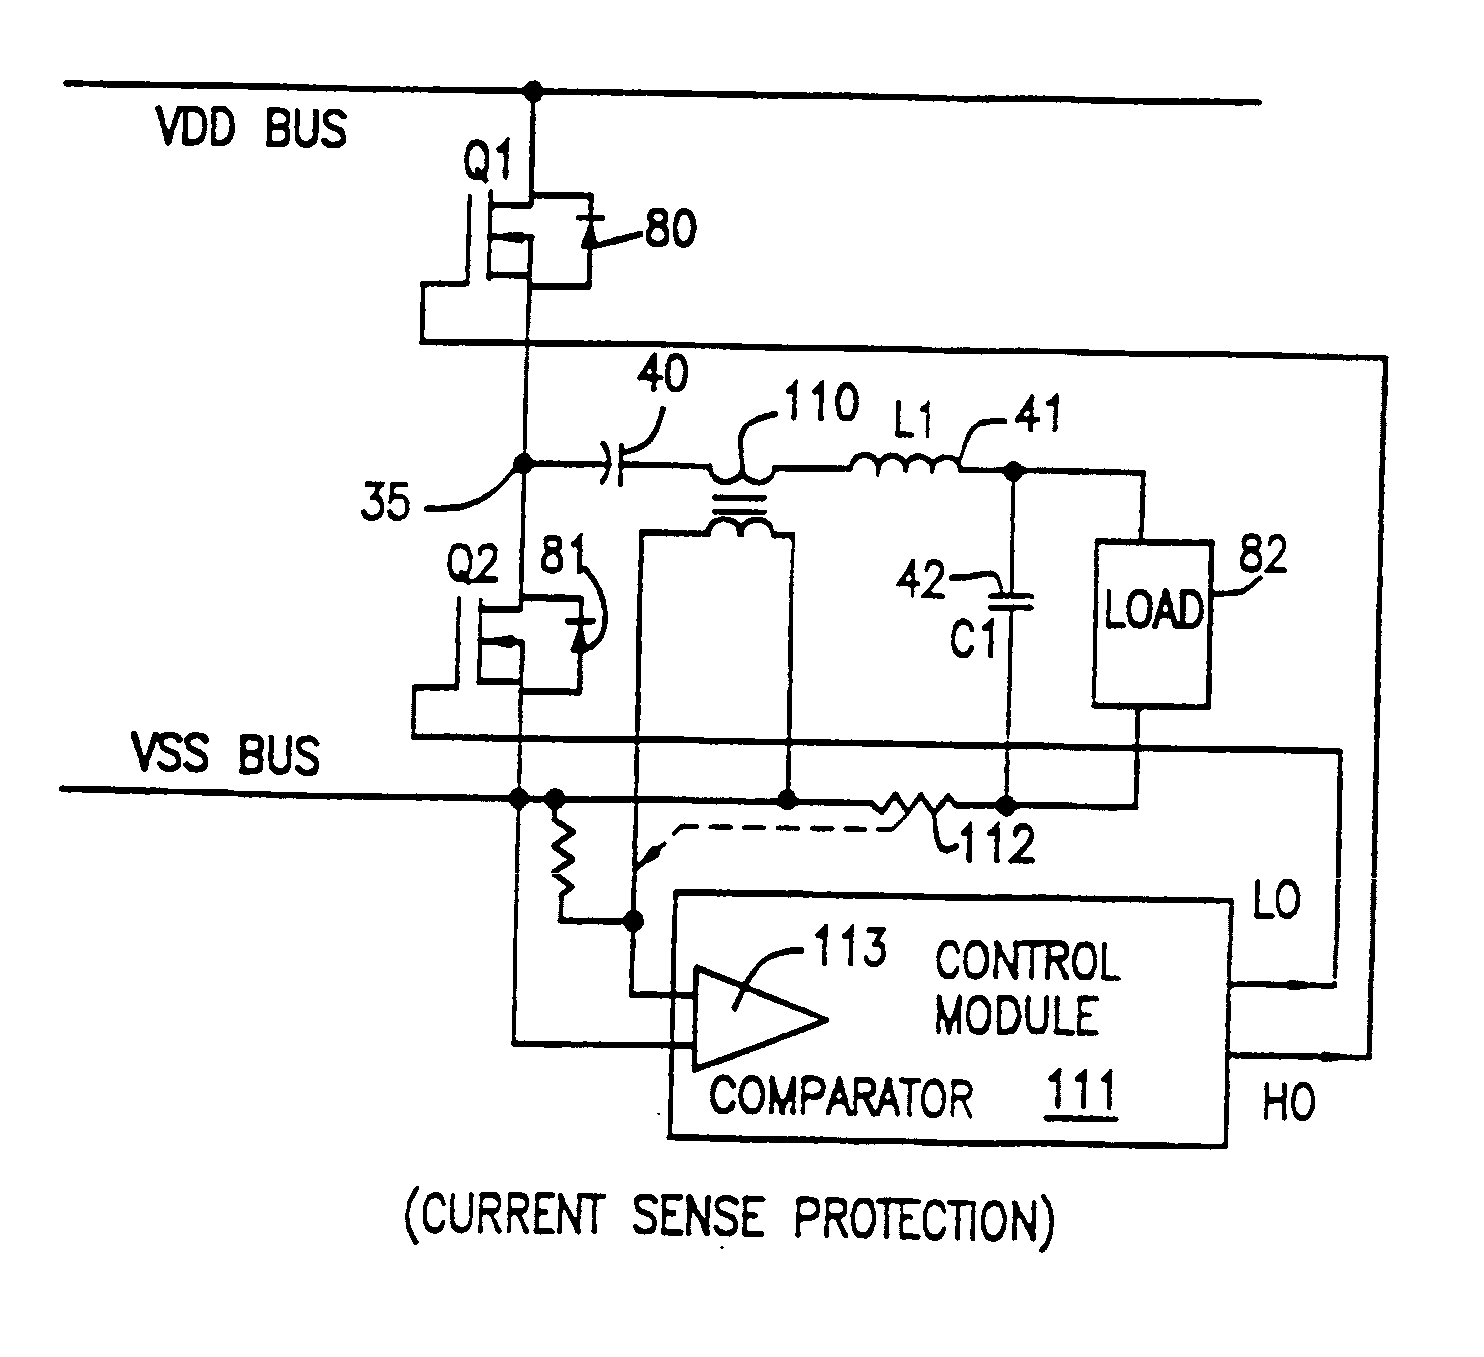 Digital power controller for gas discharge devices and the like